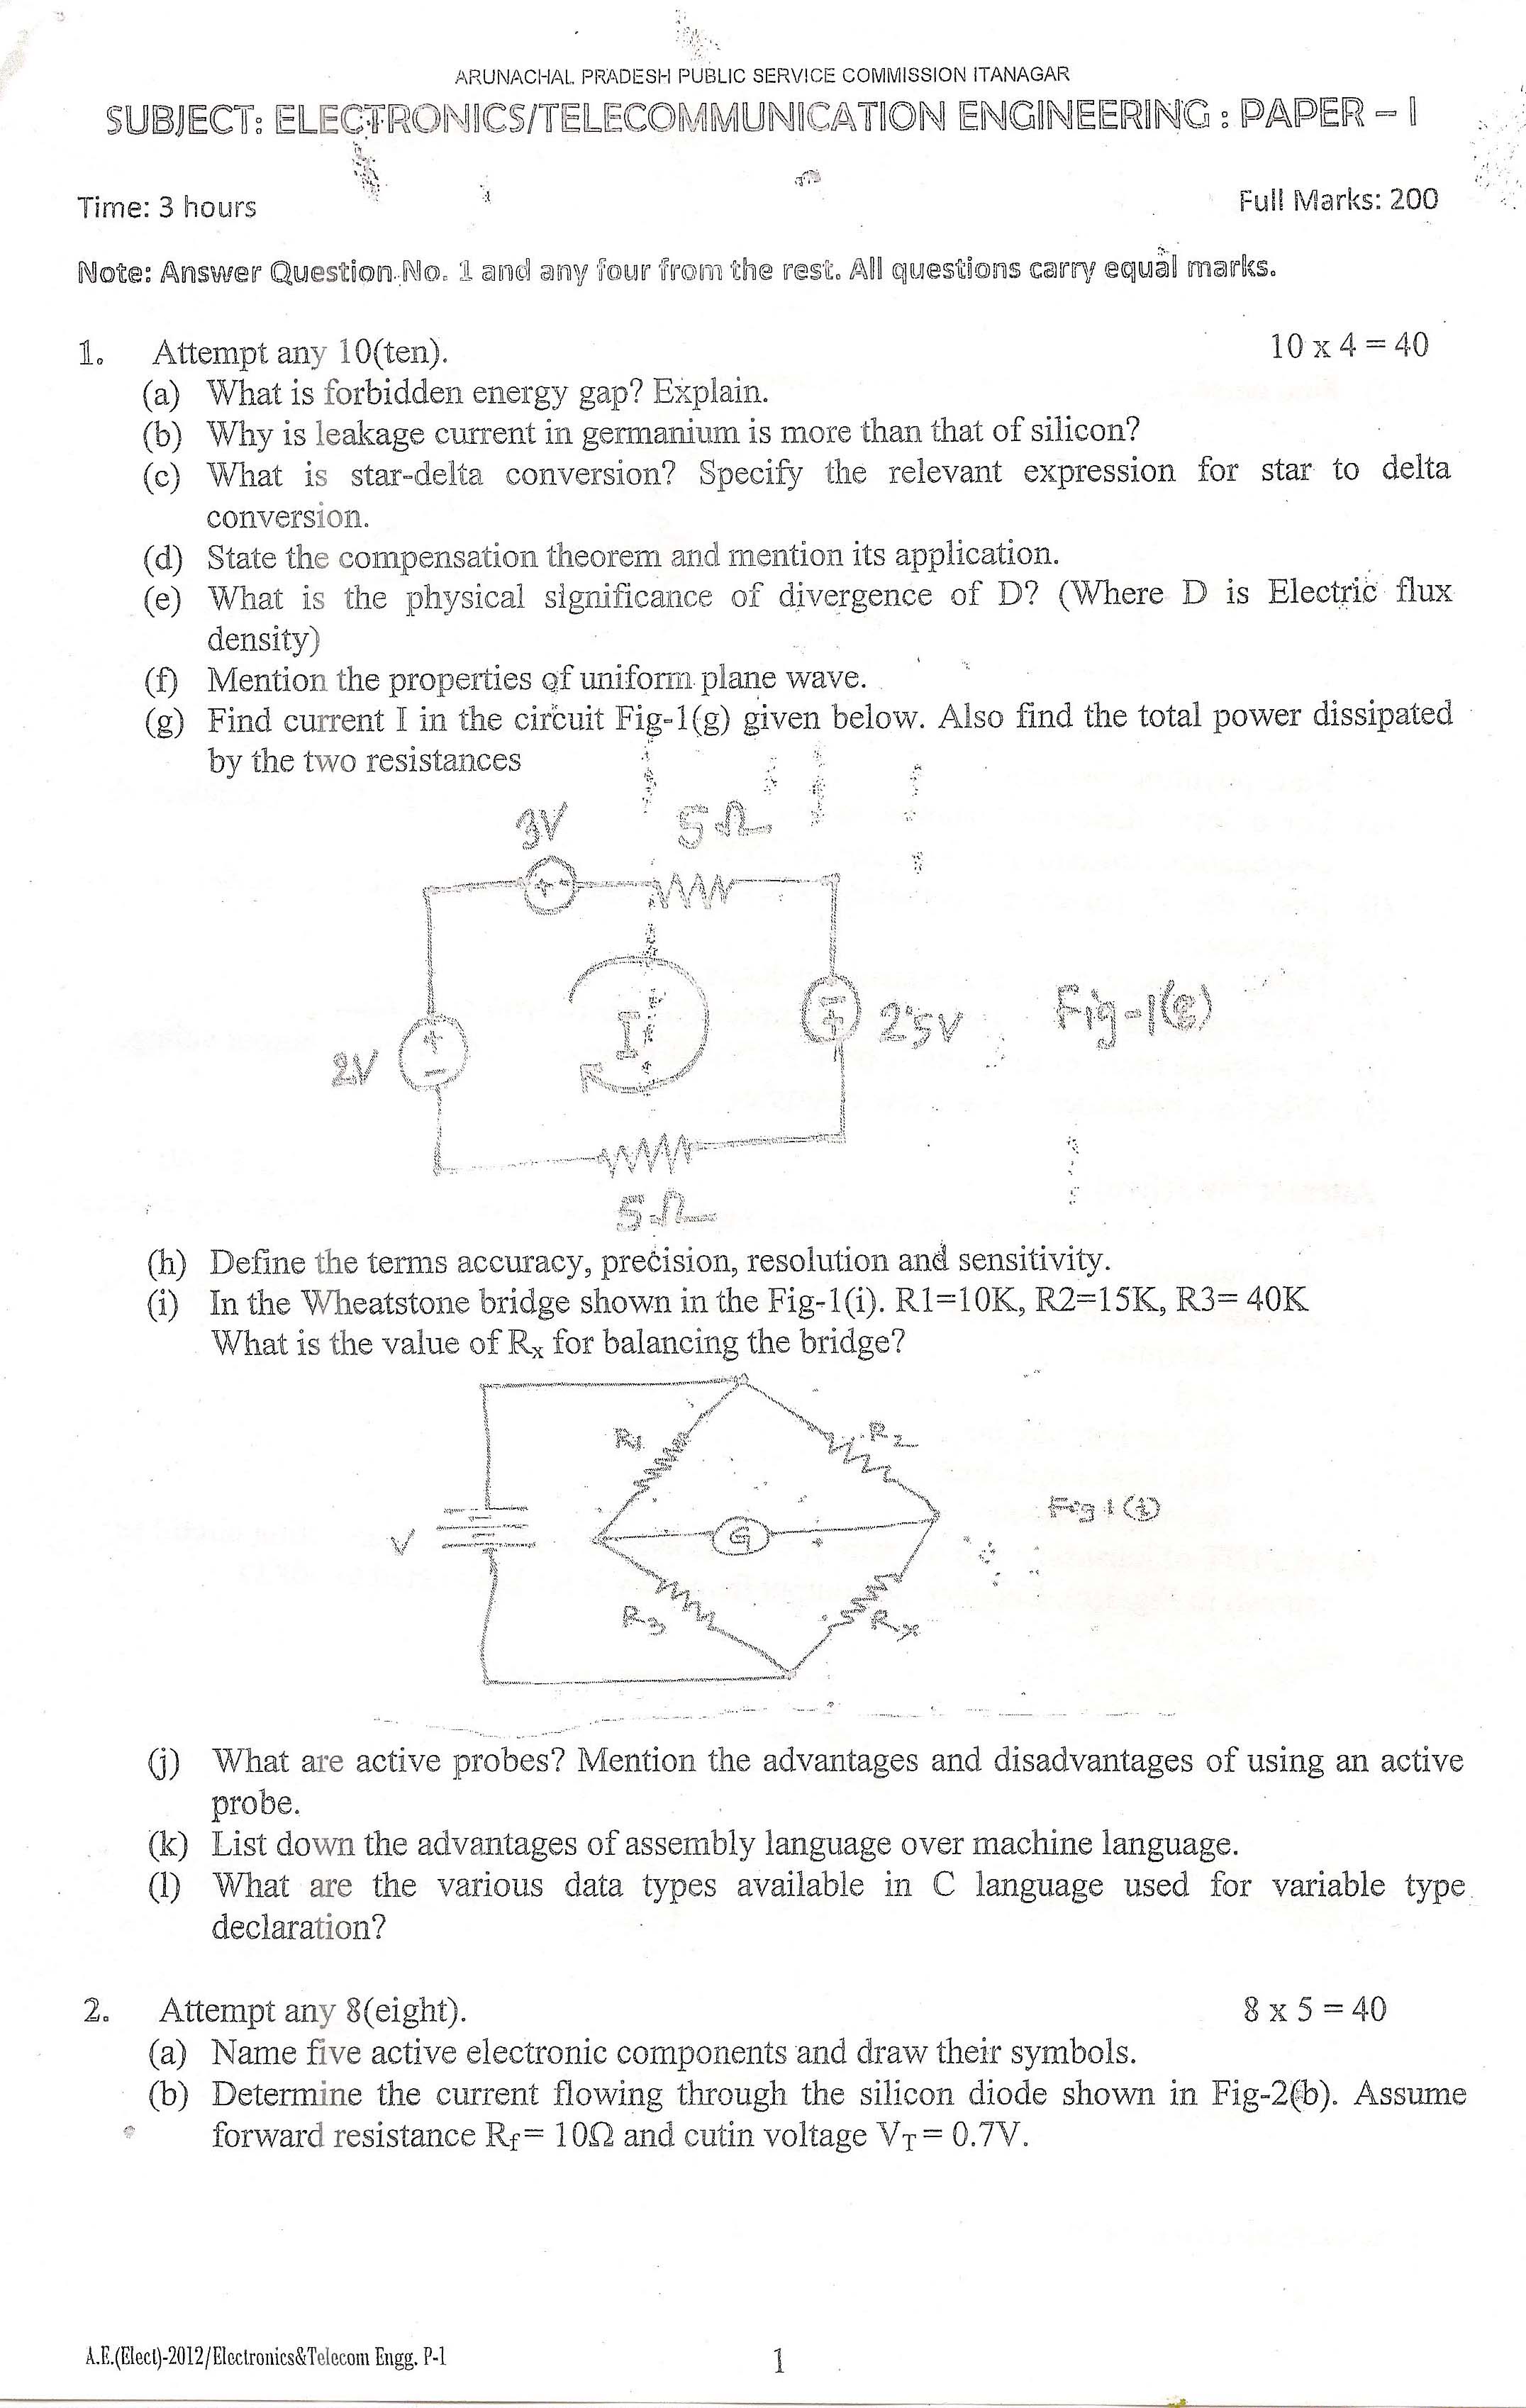 APPSC AE Electrical Exam 2012 Electronics and Telecommunication Paper I 1